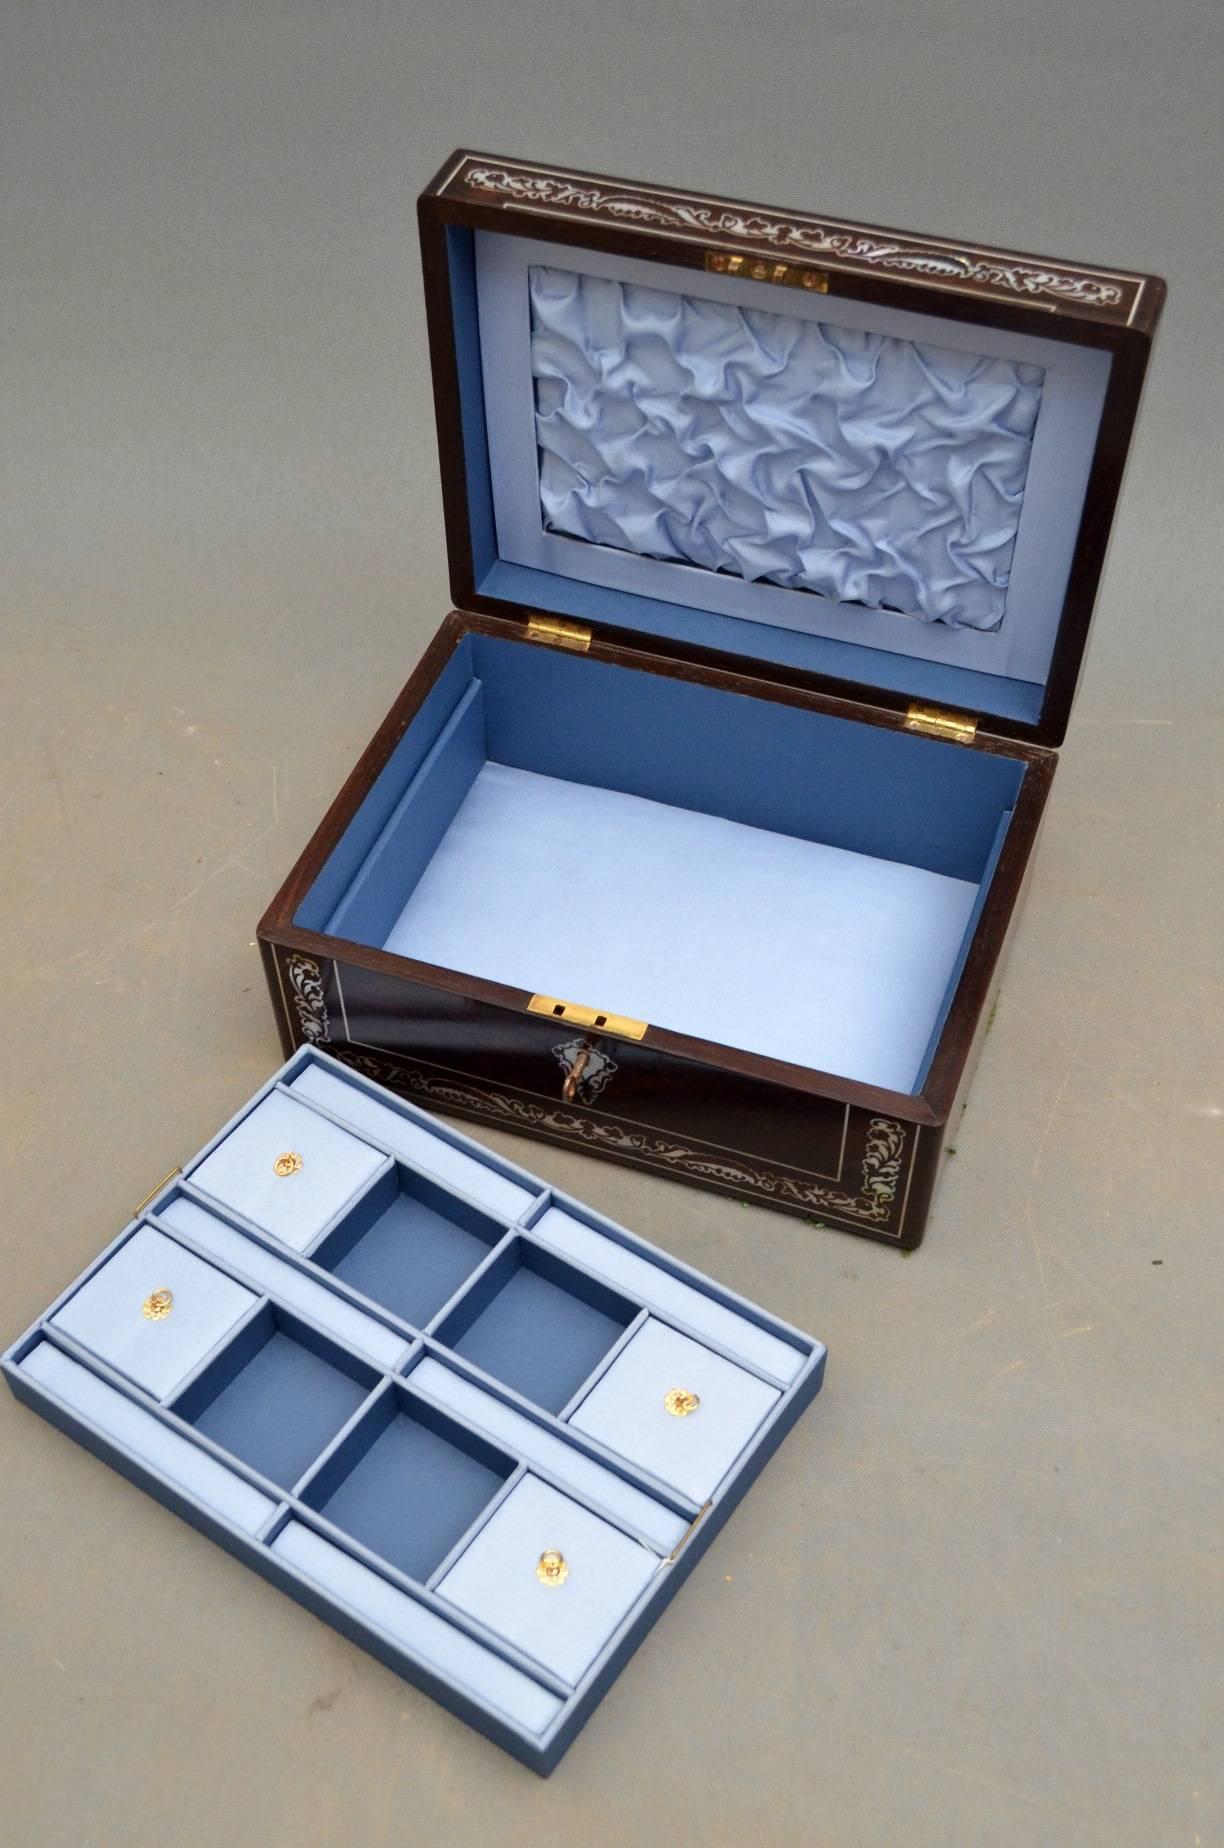 English Regency Mother-of-Pearl Inlaid Jewelry Box